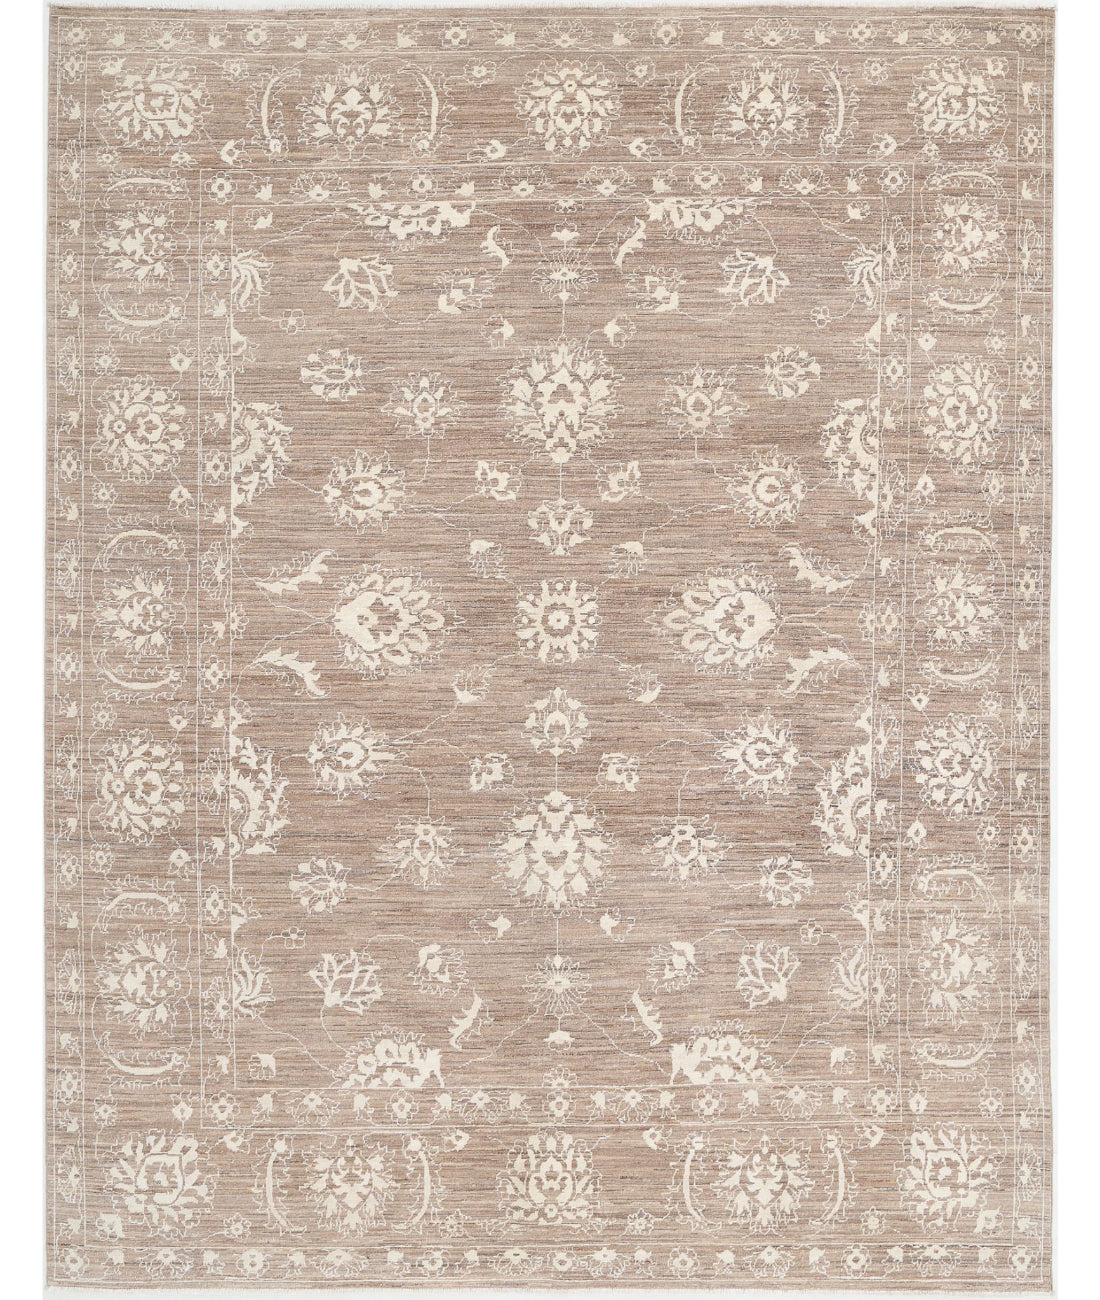 Hand Knotted Serenity Wool Rug - 7'8'' x 10'2'' 7'8'' x 10'2'' (230 X 305) / Taupe / Ivory